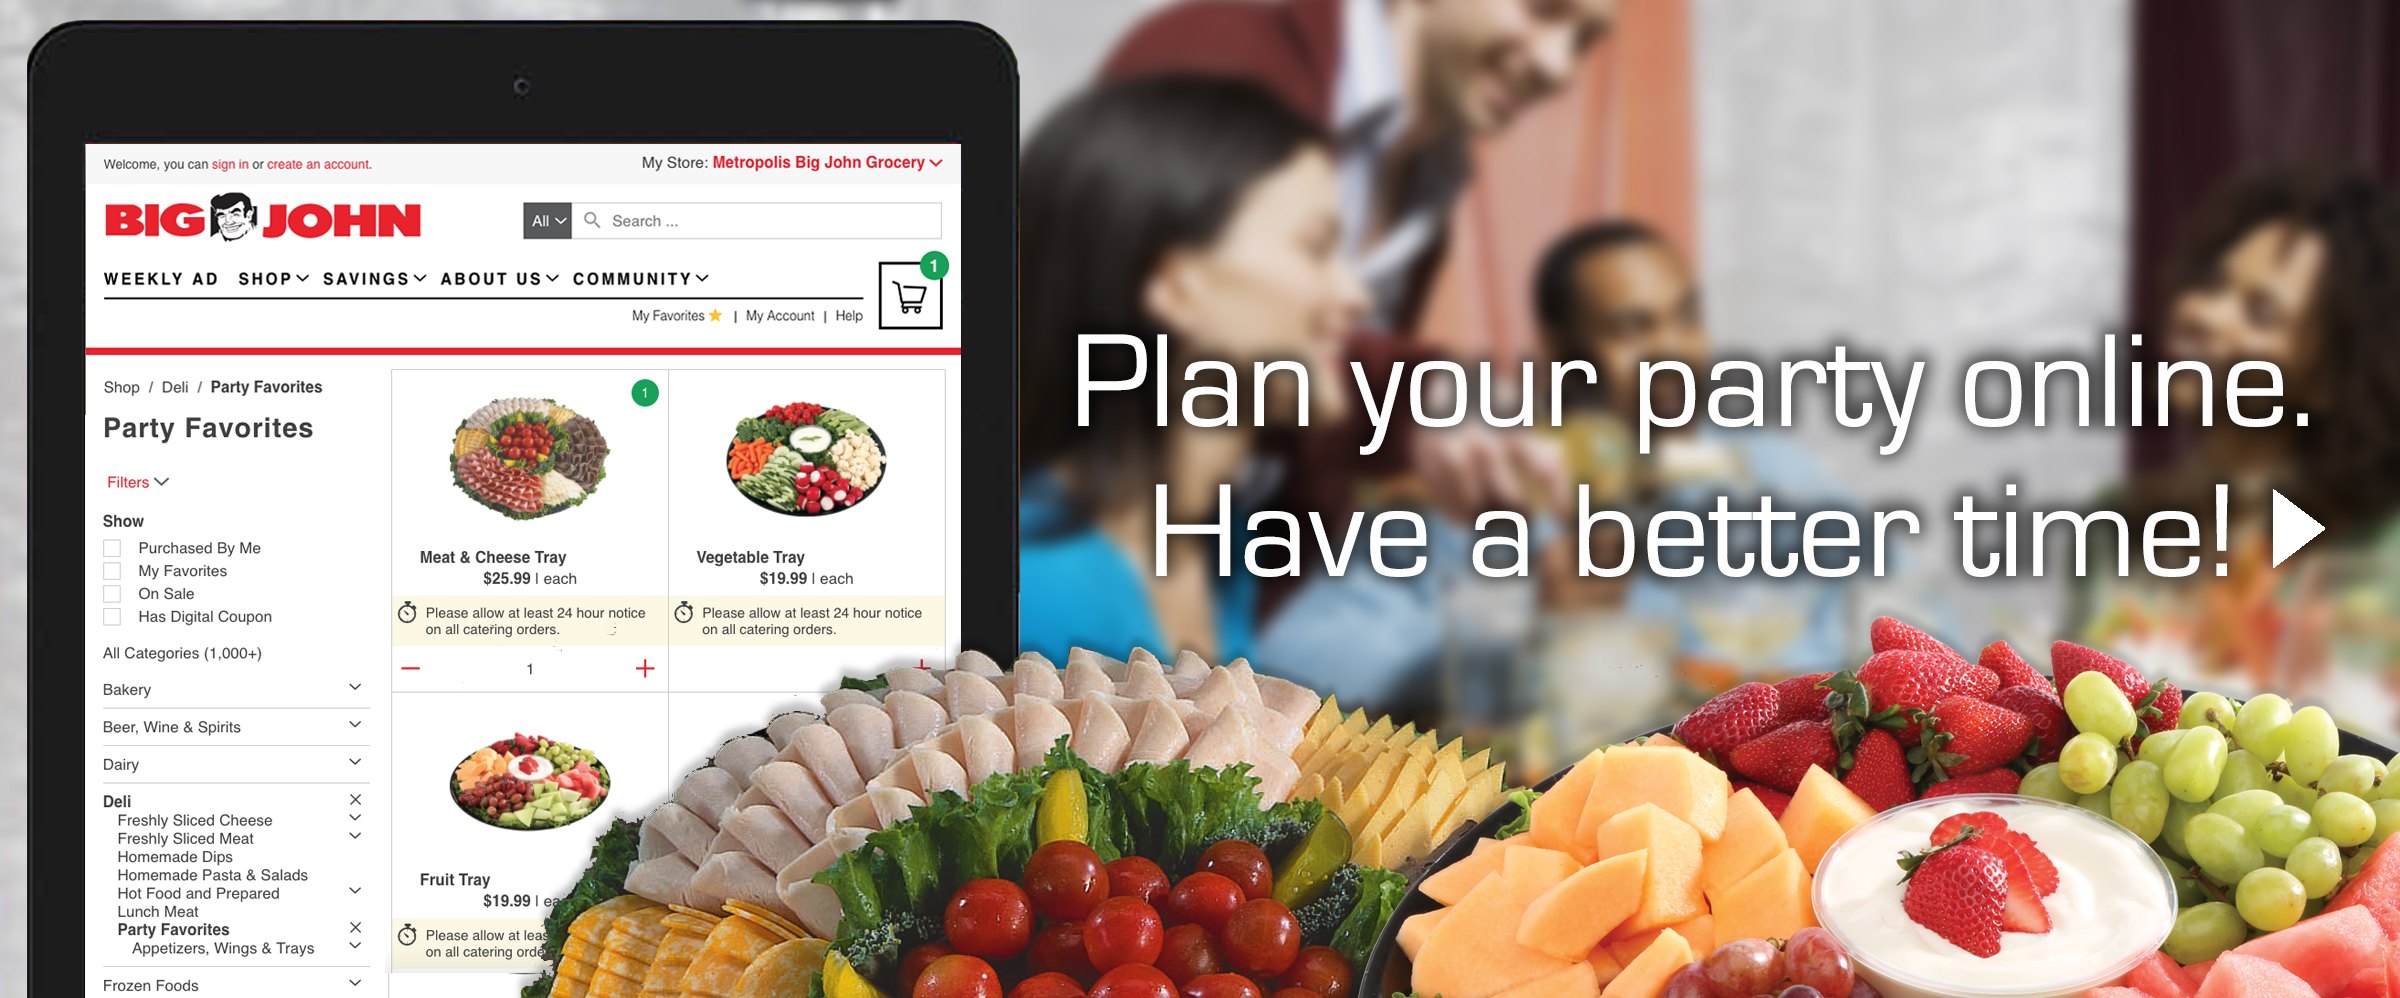 Plan your party online. Have a better time! Go shop for party trays online. >